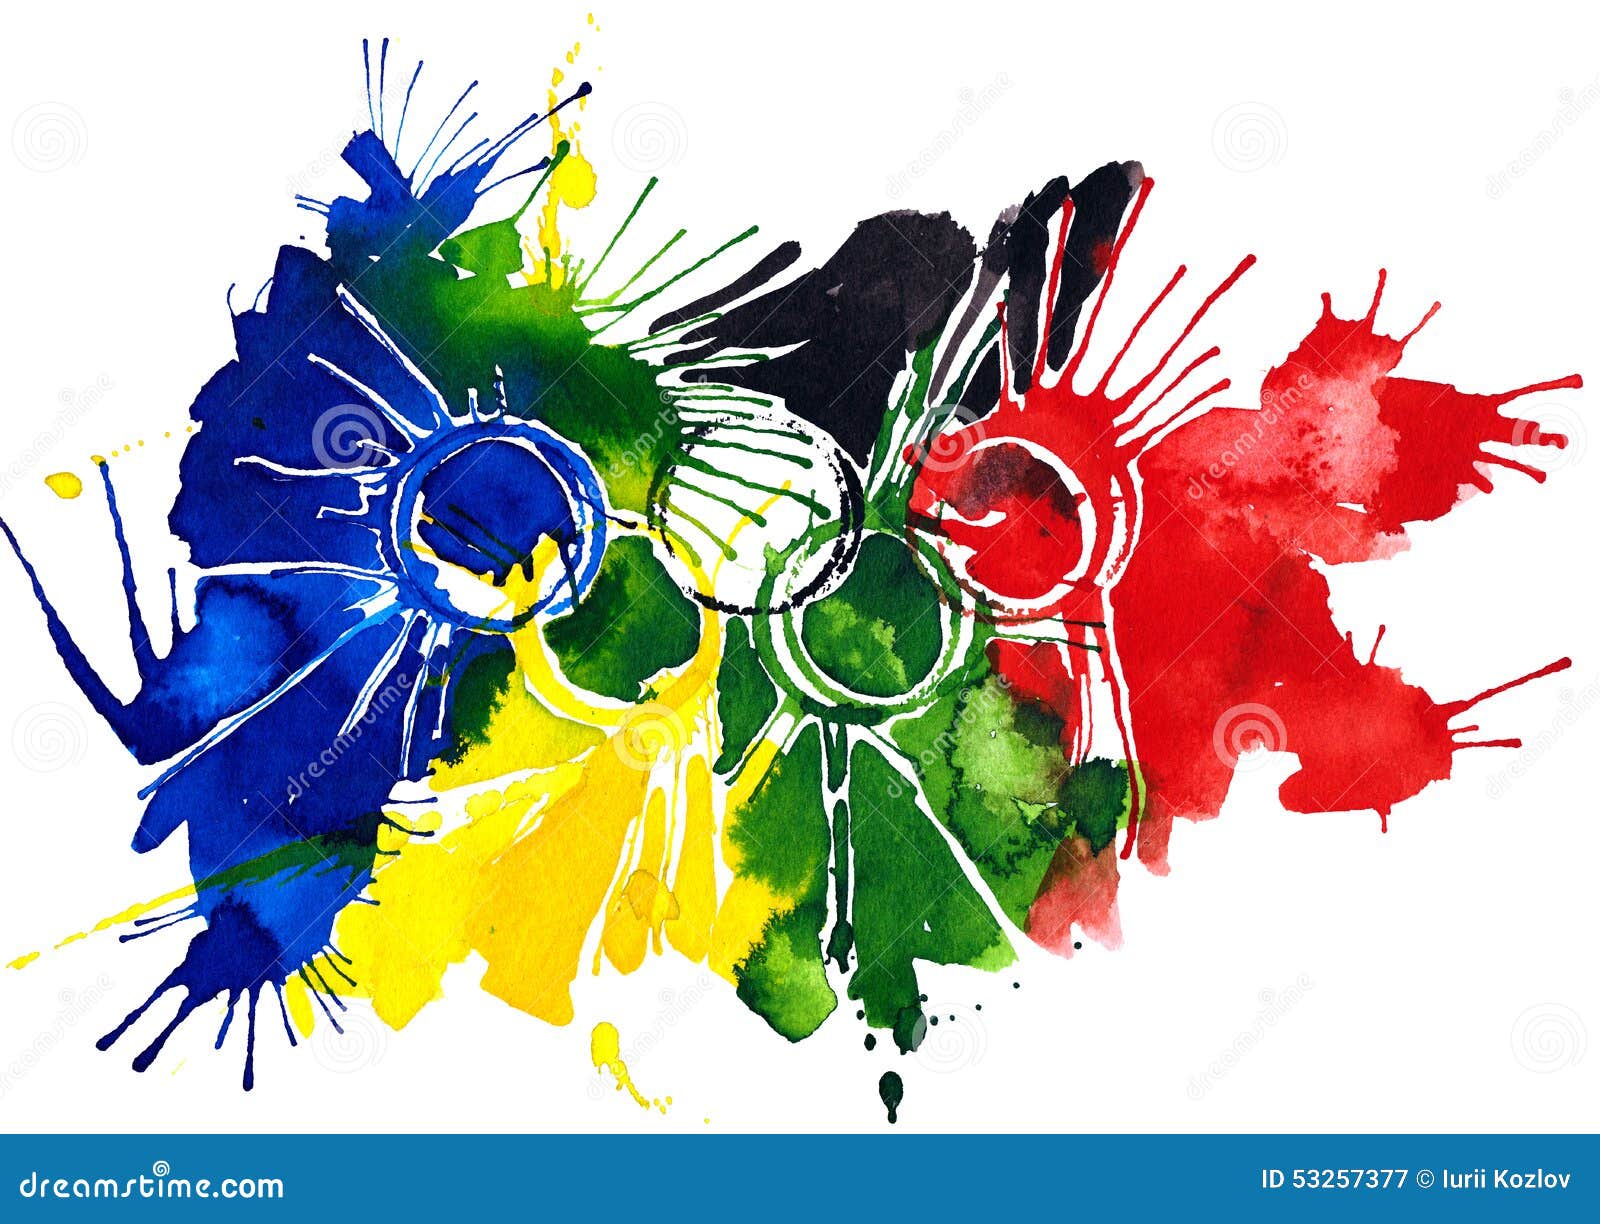 Which color represents each continent in the Olympics rings? - AS USA